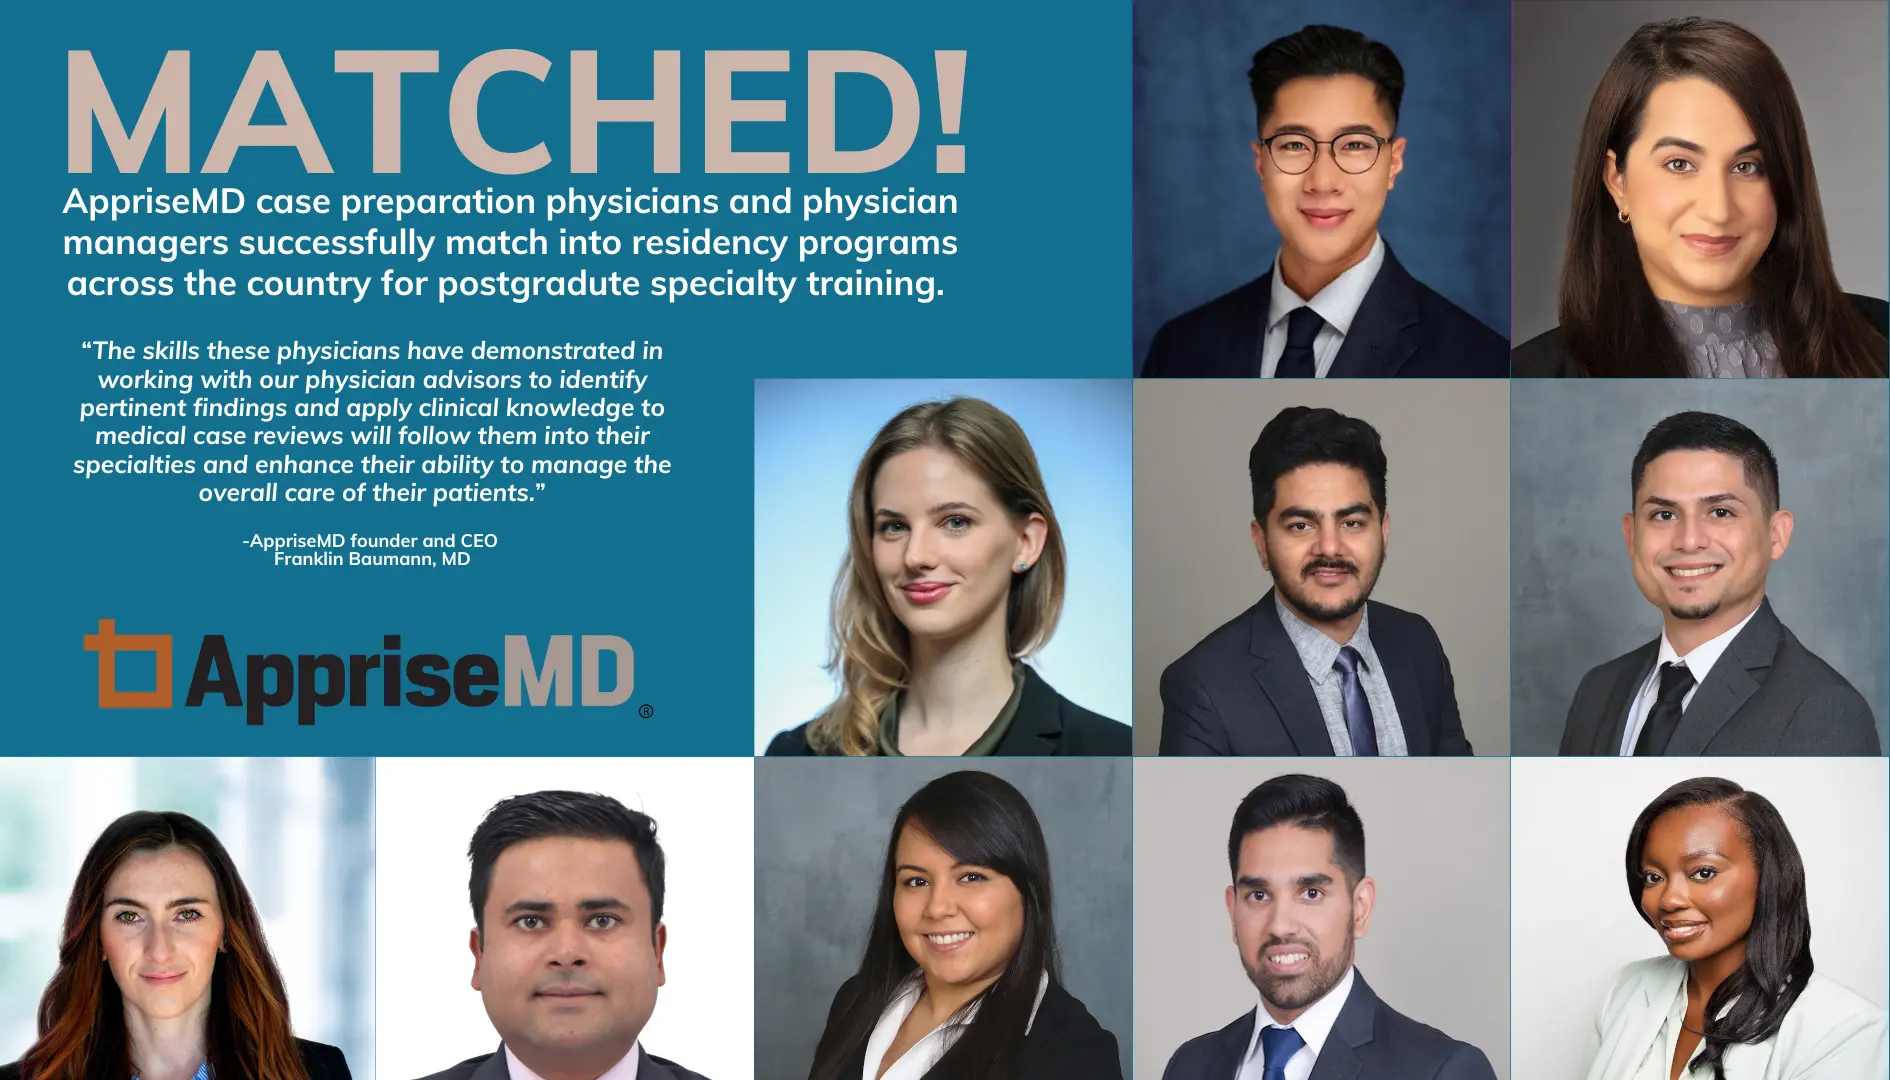 AppriseMD case preparation physicians successfully match into residency programs across the country.